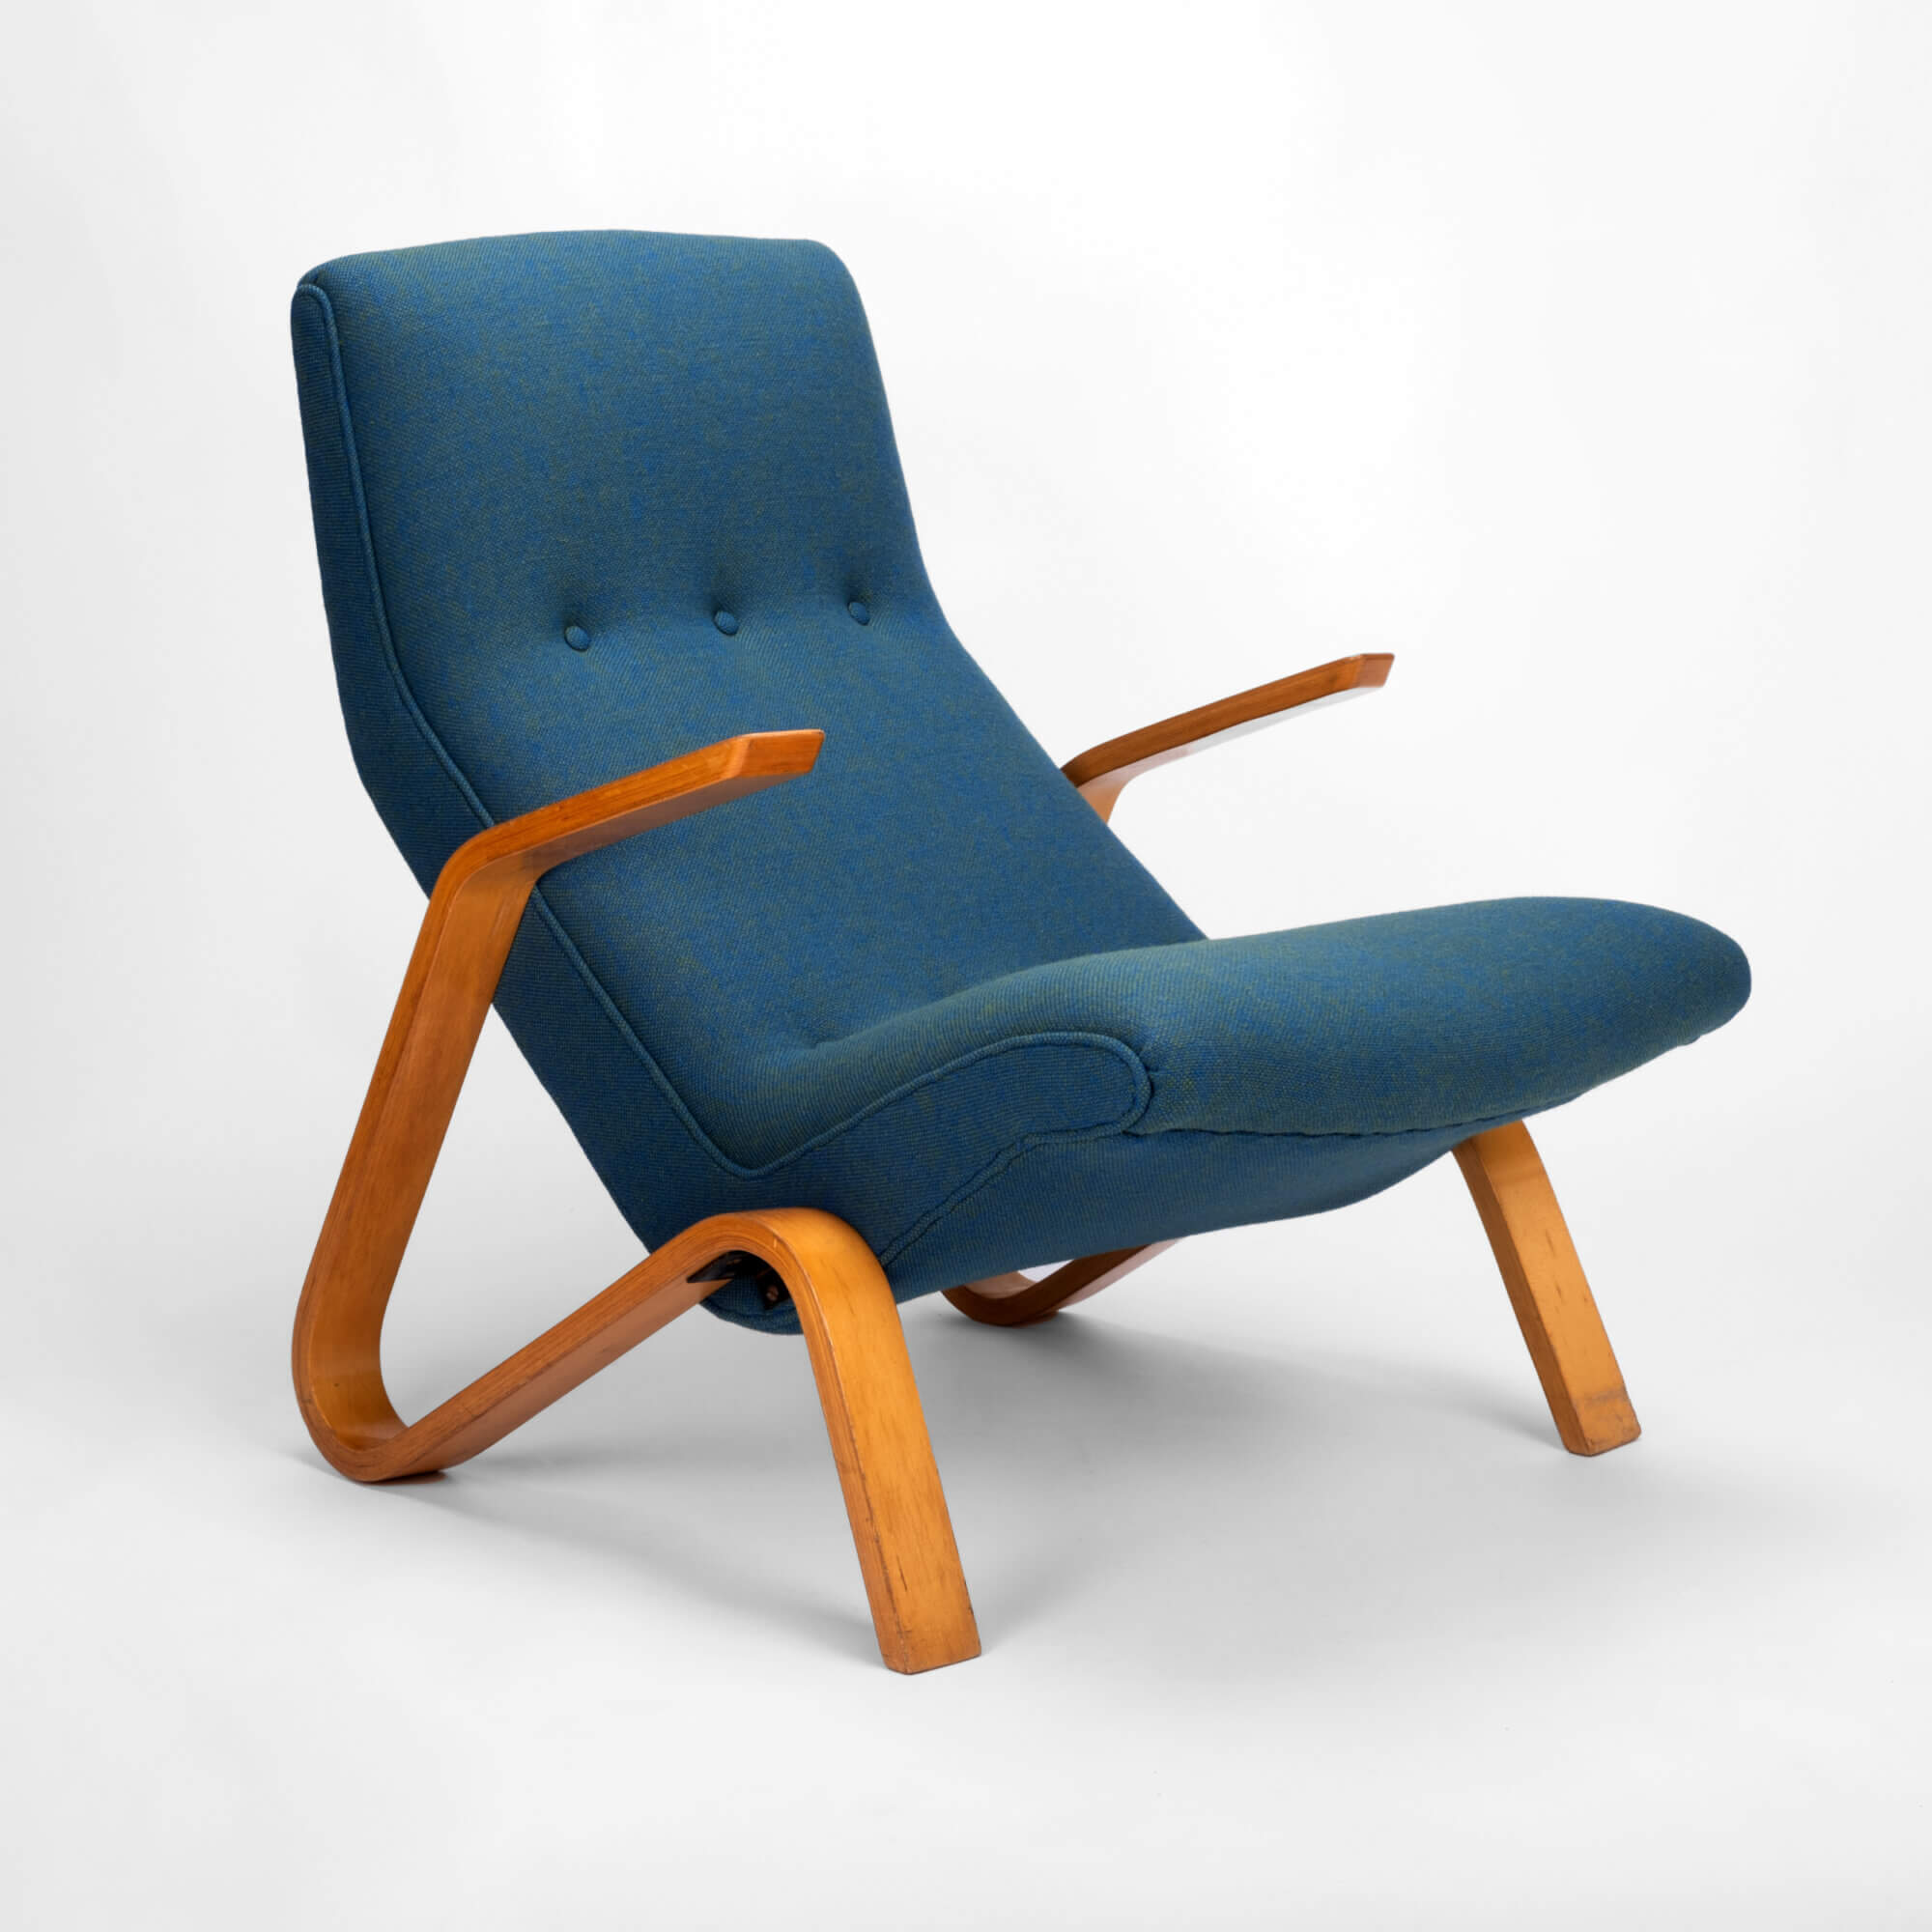 Eero Saarinen Grasshopper lounge chair shown from the front side